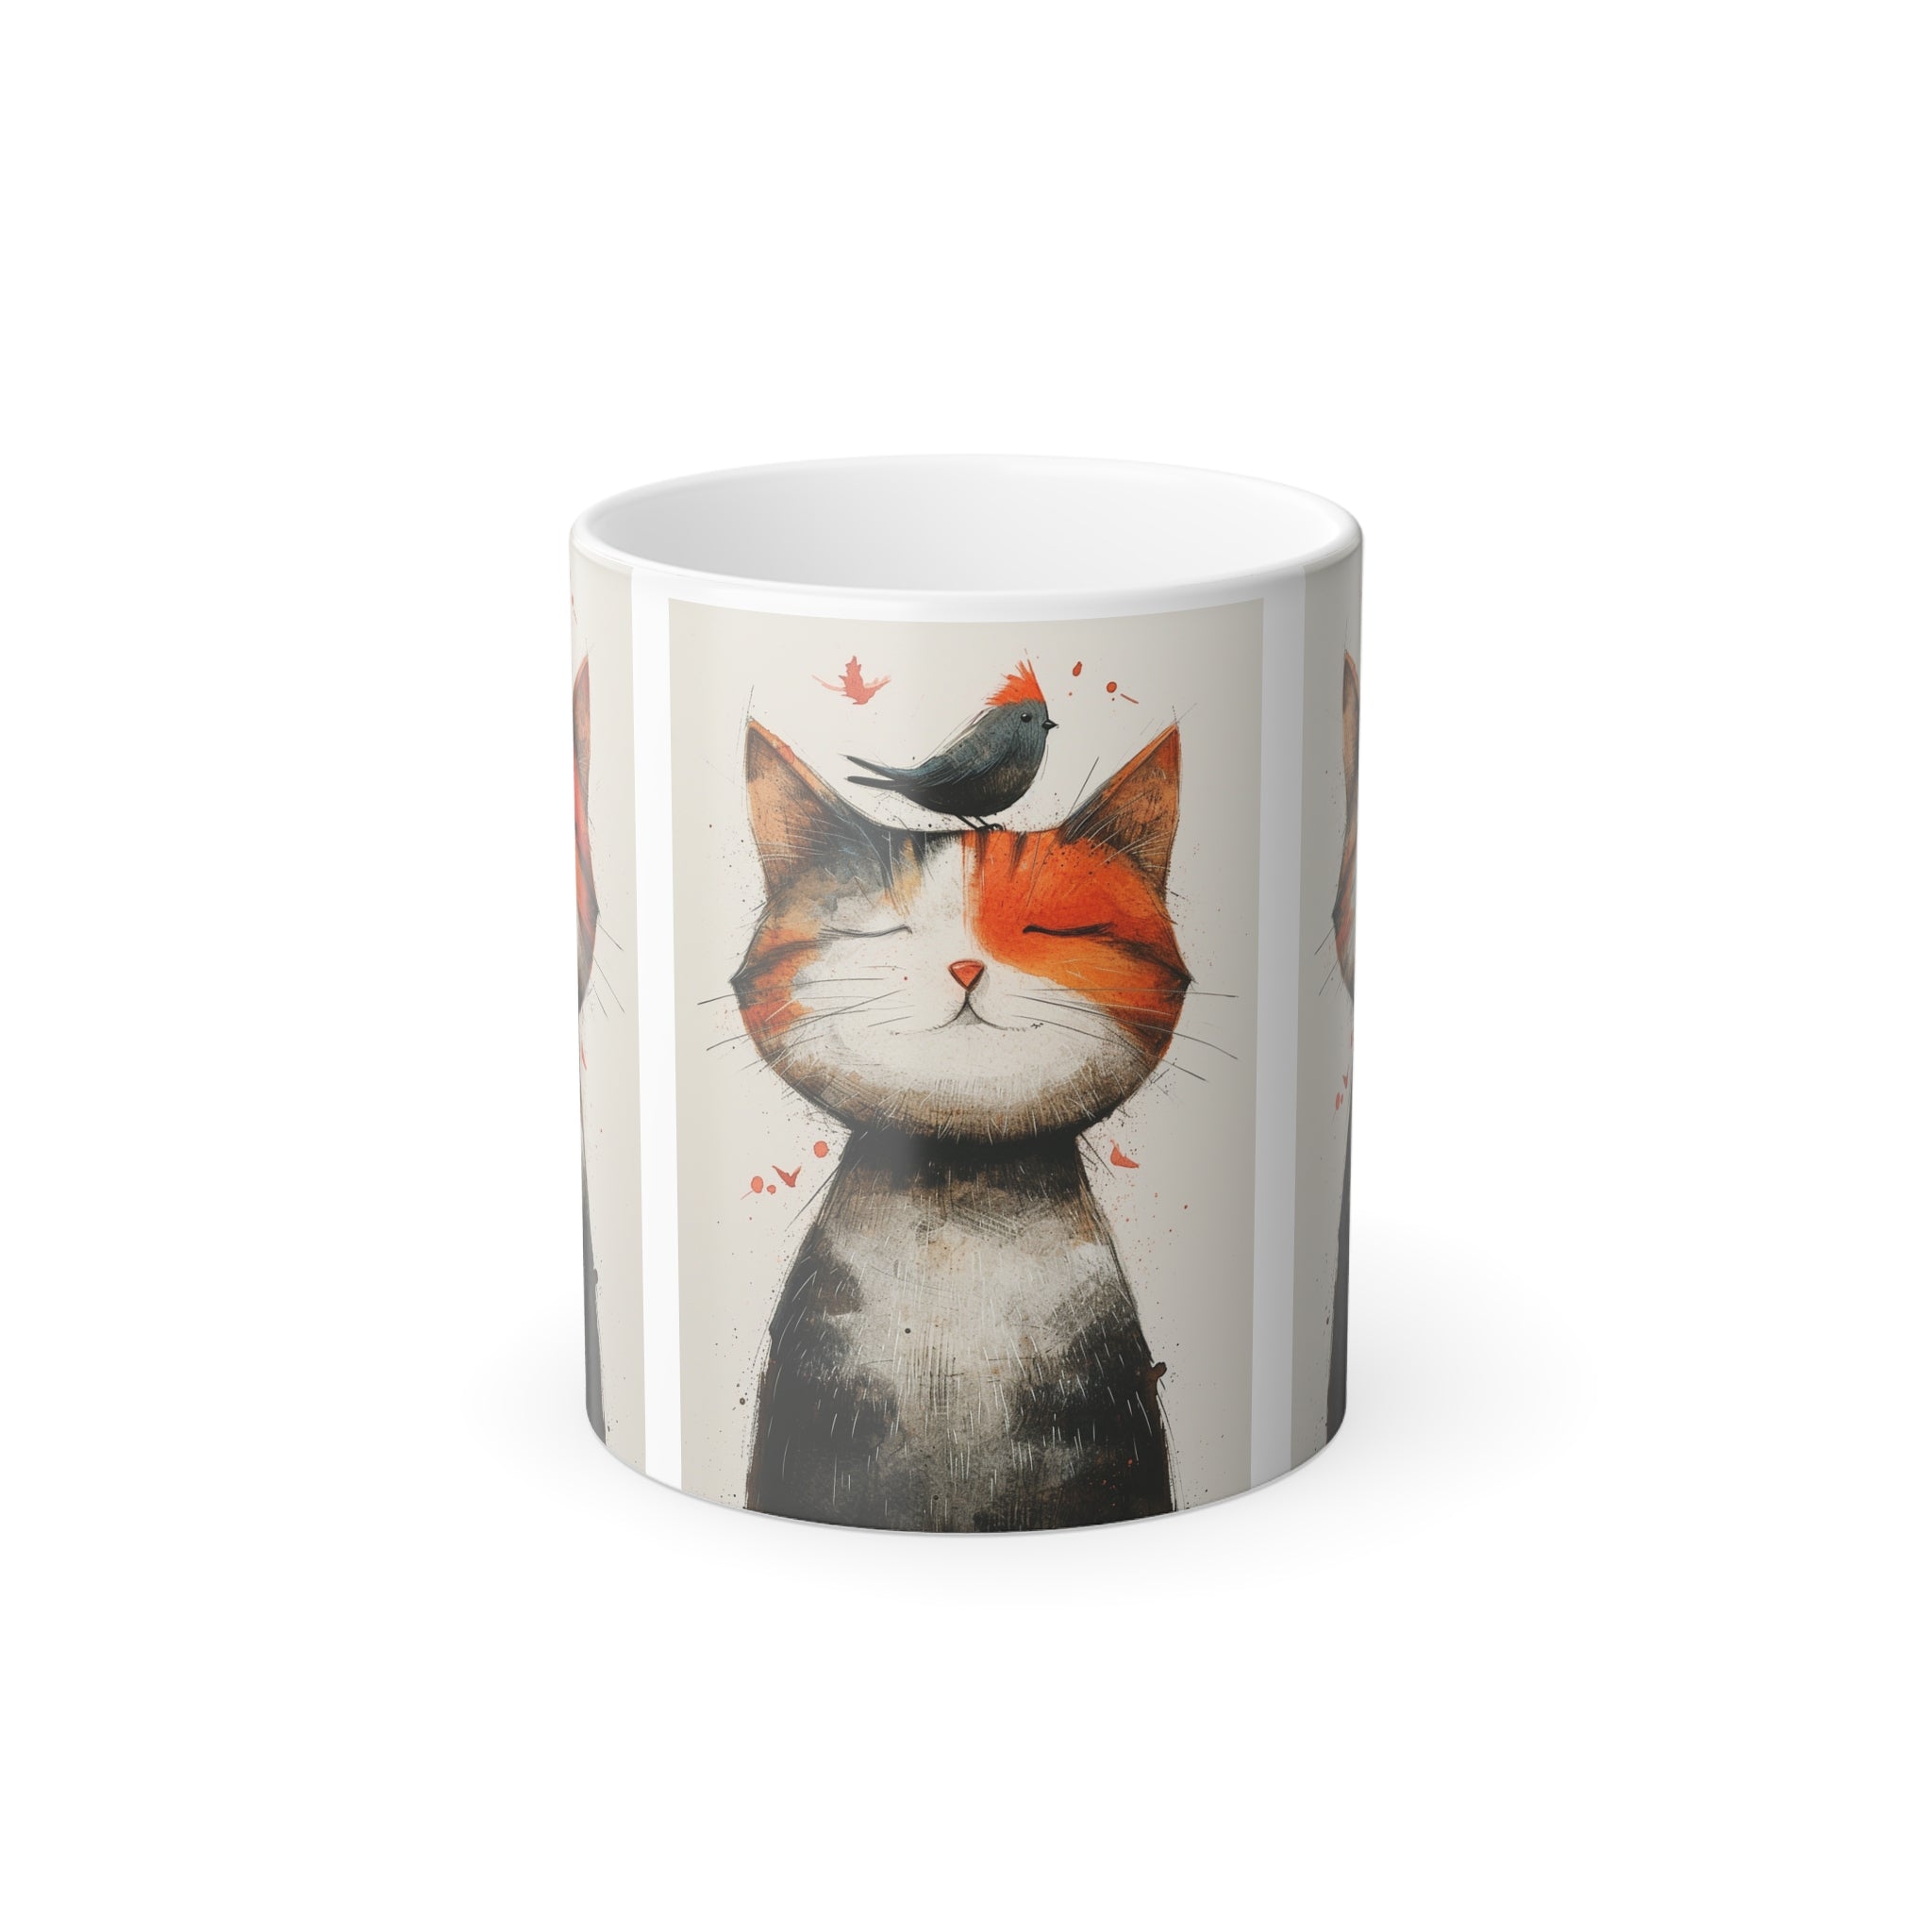 🐱🐦 Cat and Trusting Red Sparrow Friend Color Morphing Mug - 11oz | Magic Heat-Changing Ceramic Cup for Cat Lovers | Unique Color-Shift Coffee Mug